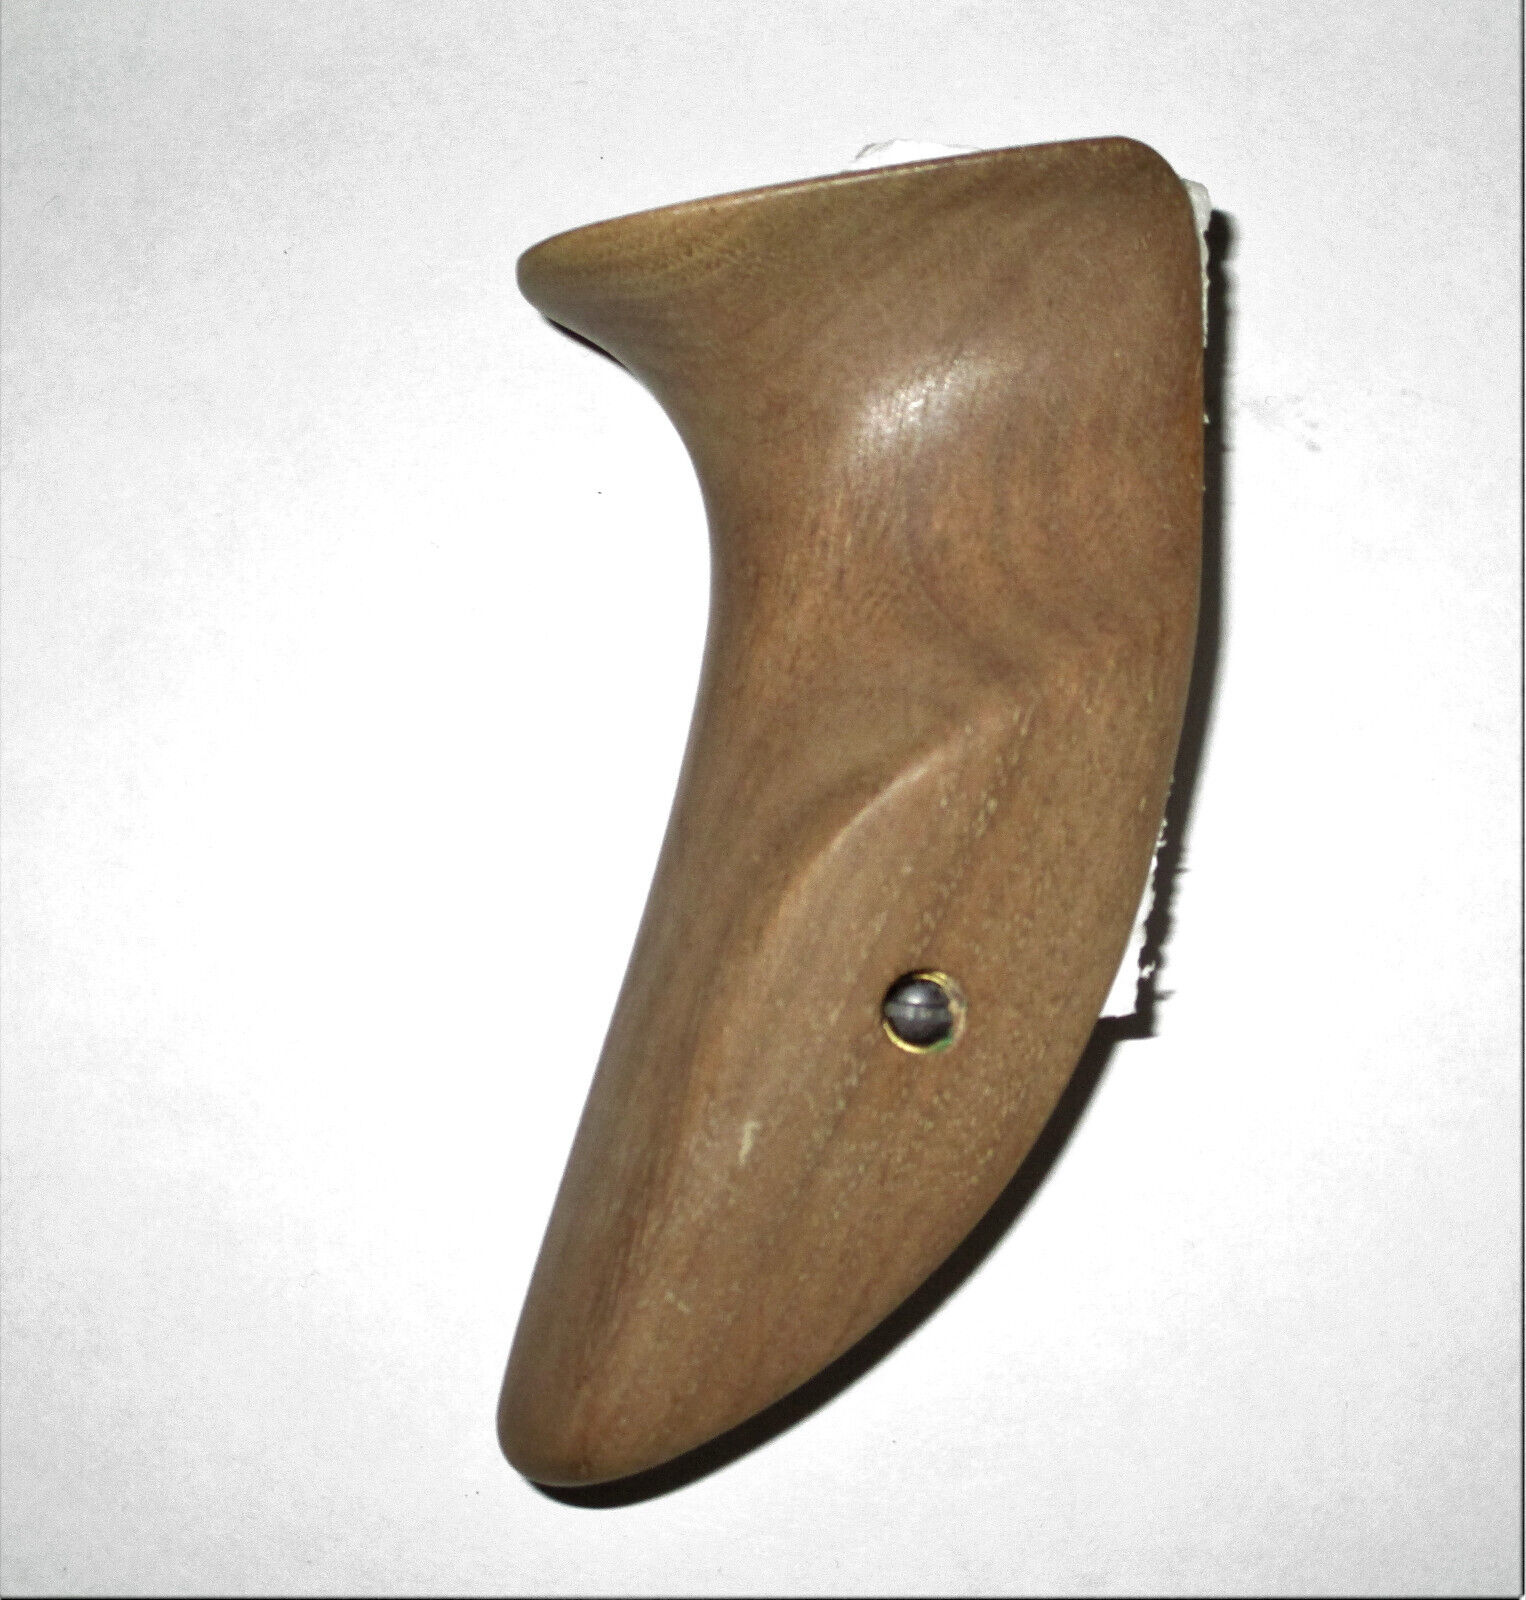 Pse Archery Wood Riser Grip For Compound Bow Right Handed Full Phase 3 Vintage